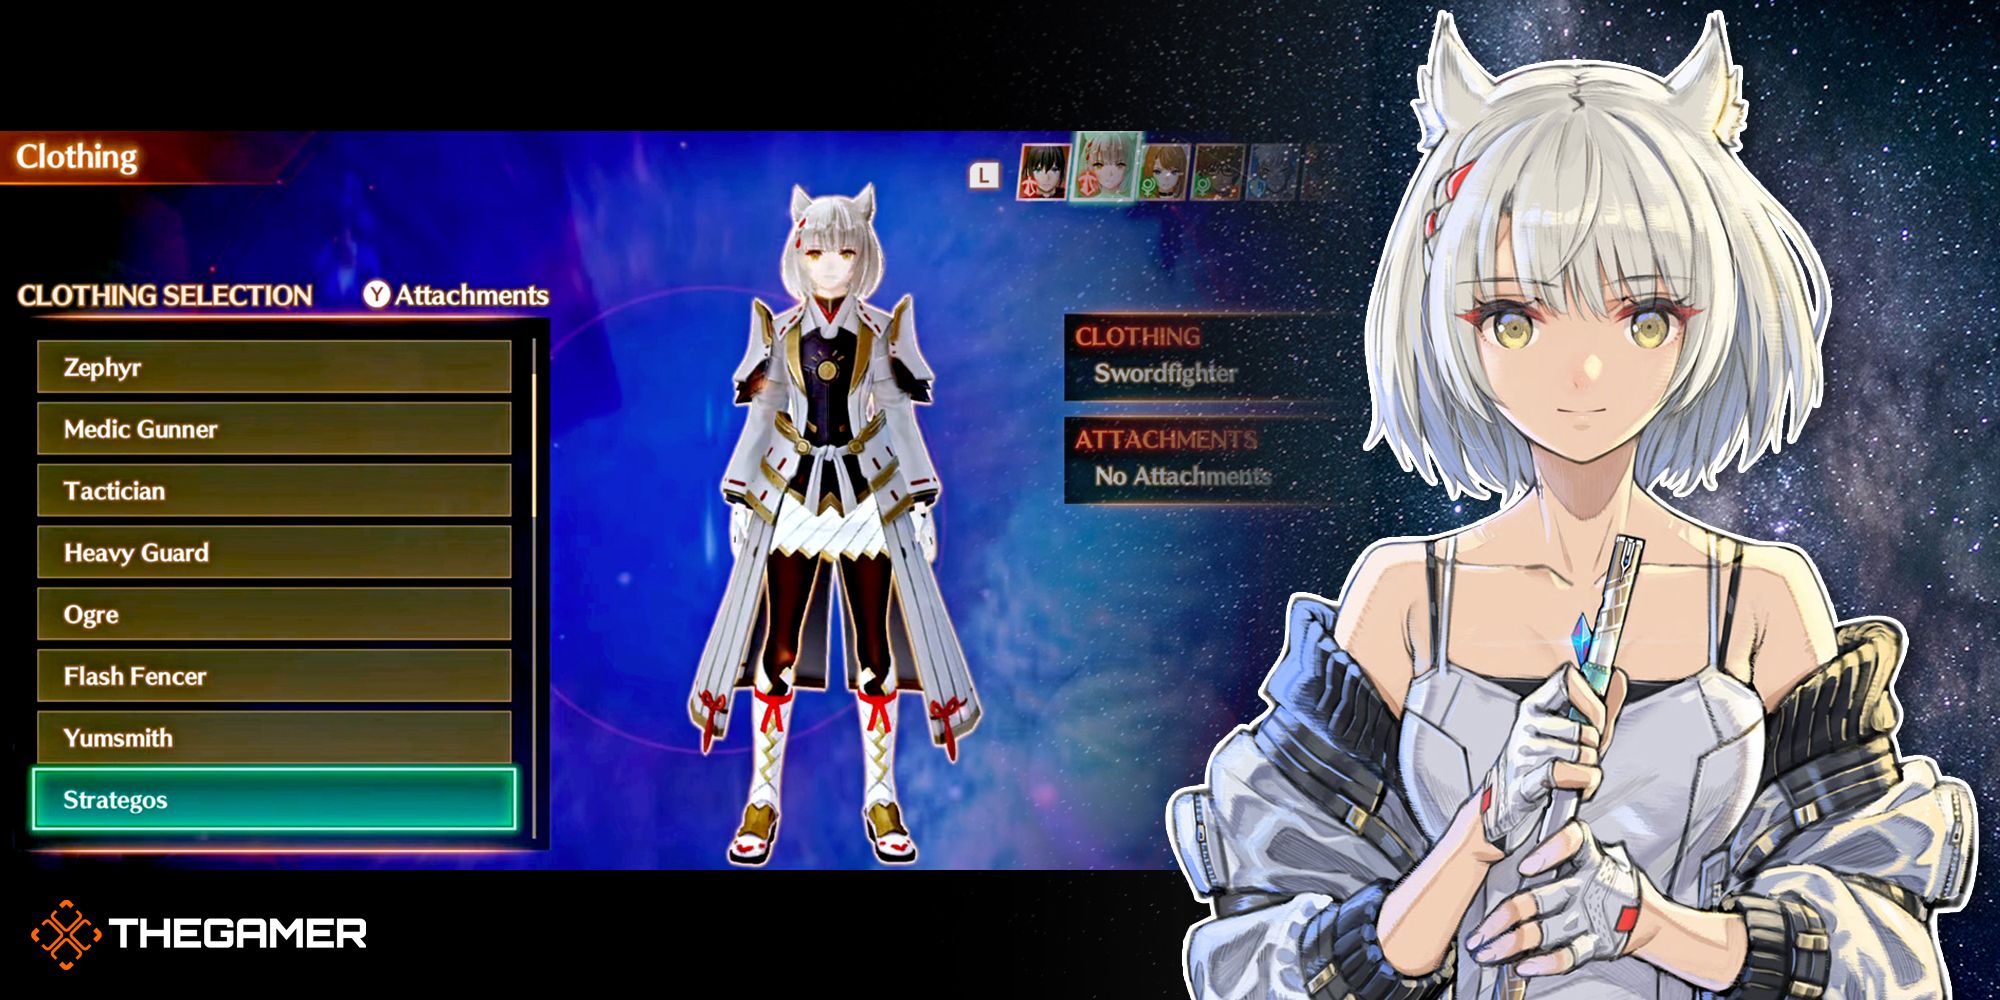 How To Unlock And Equip Outfits In Xenoblade Chronicles 3